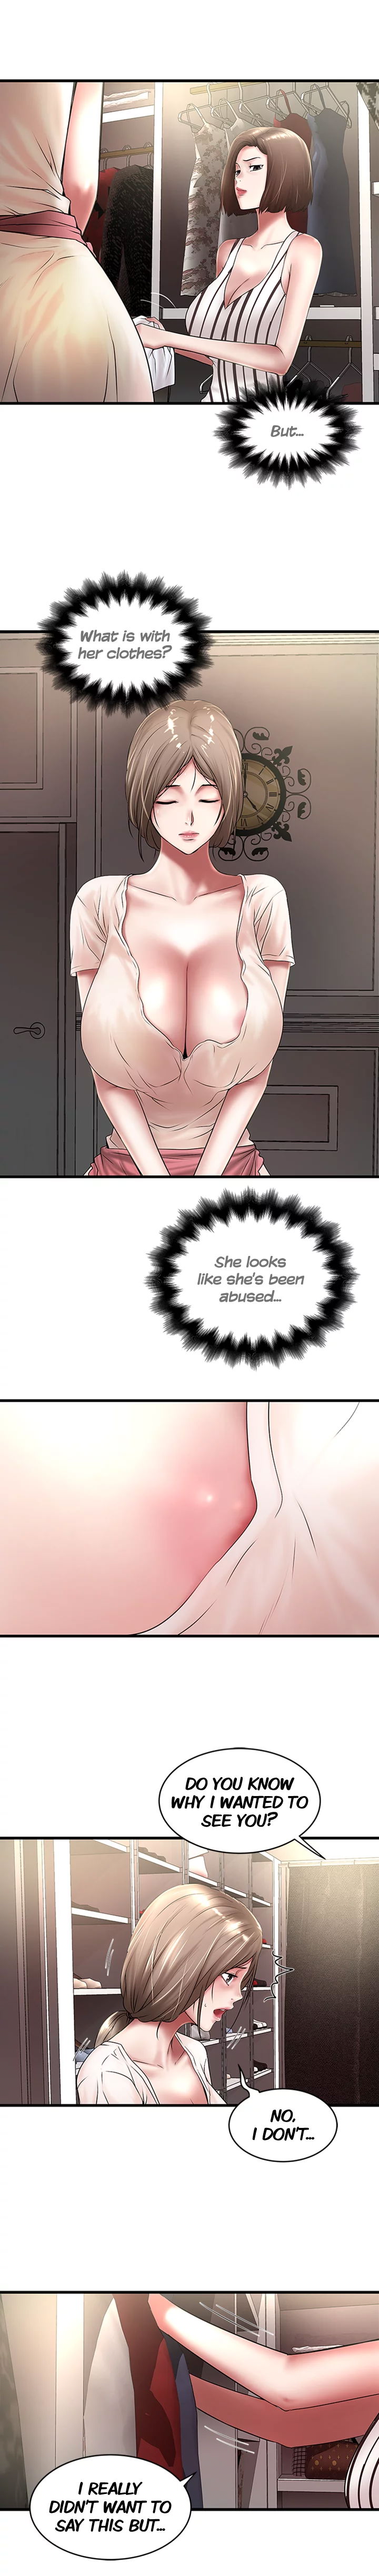 the-housemaid-chap-21-1